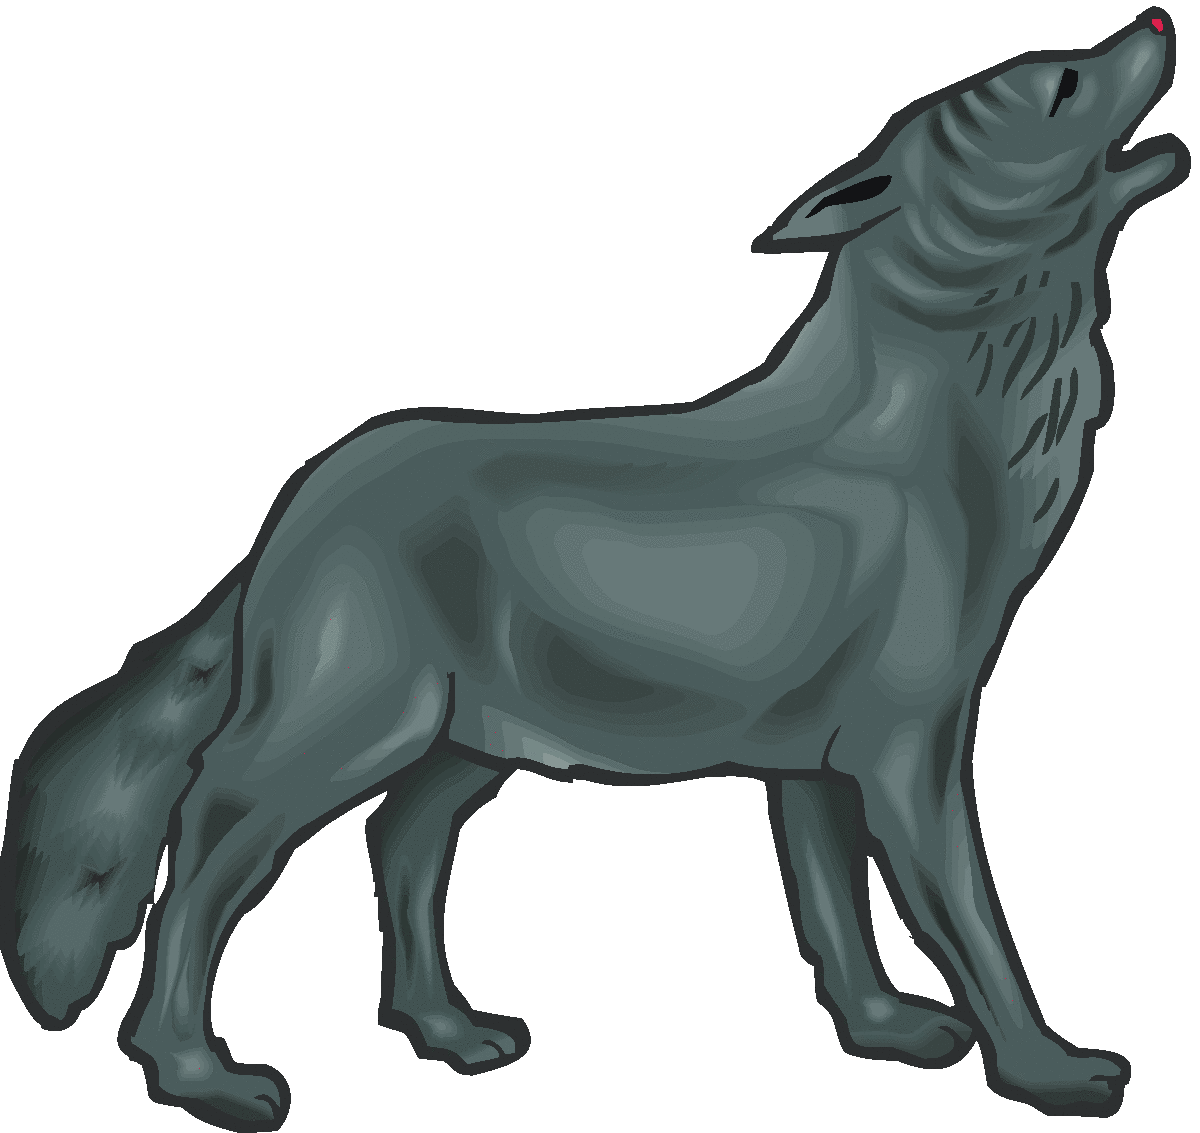 Free wolf clipart